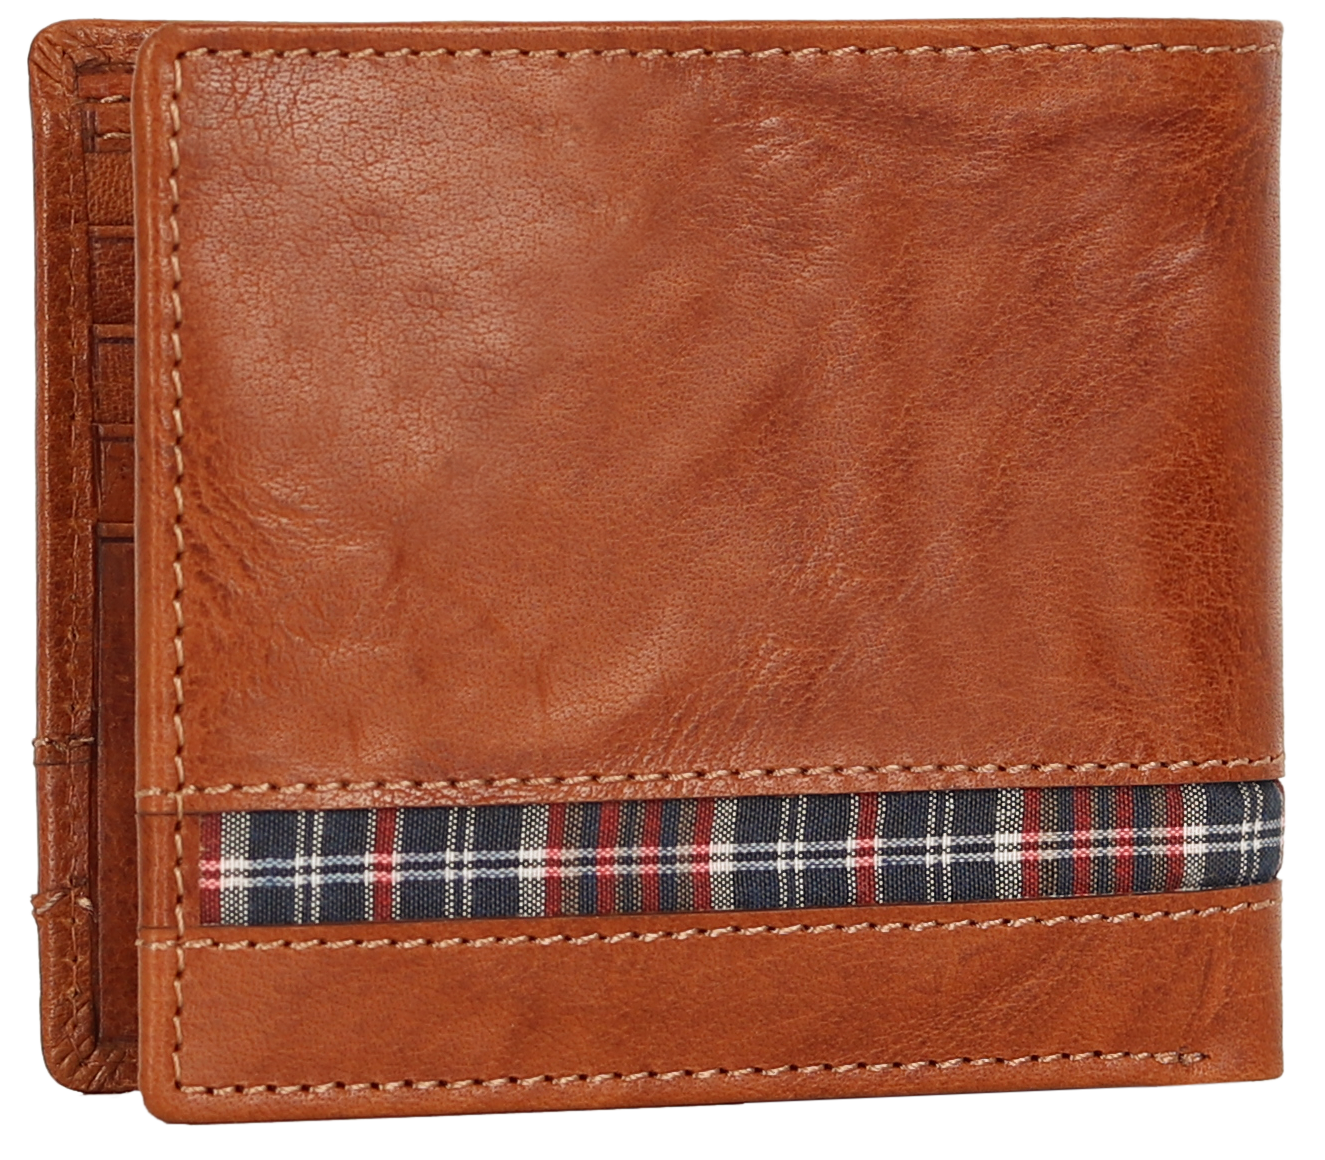 Rugged Earth Men's Bifold Plaid Wallet